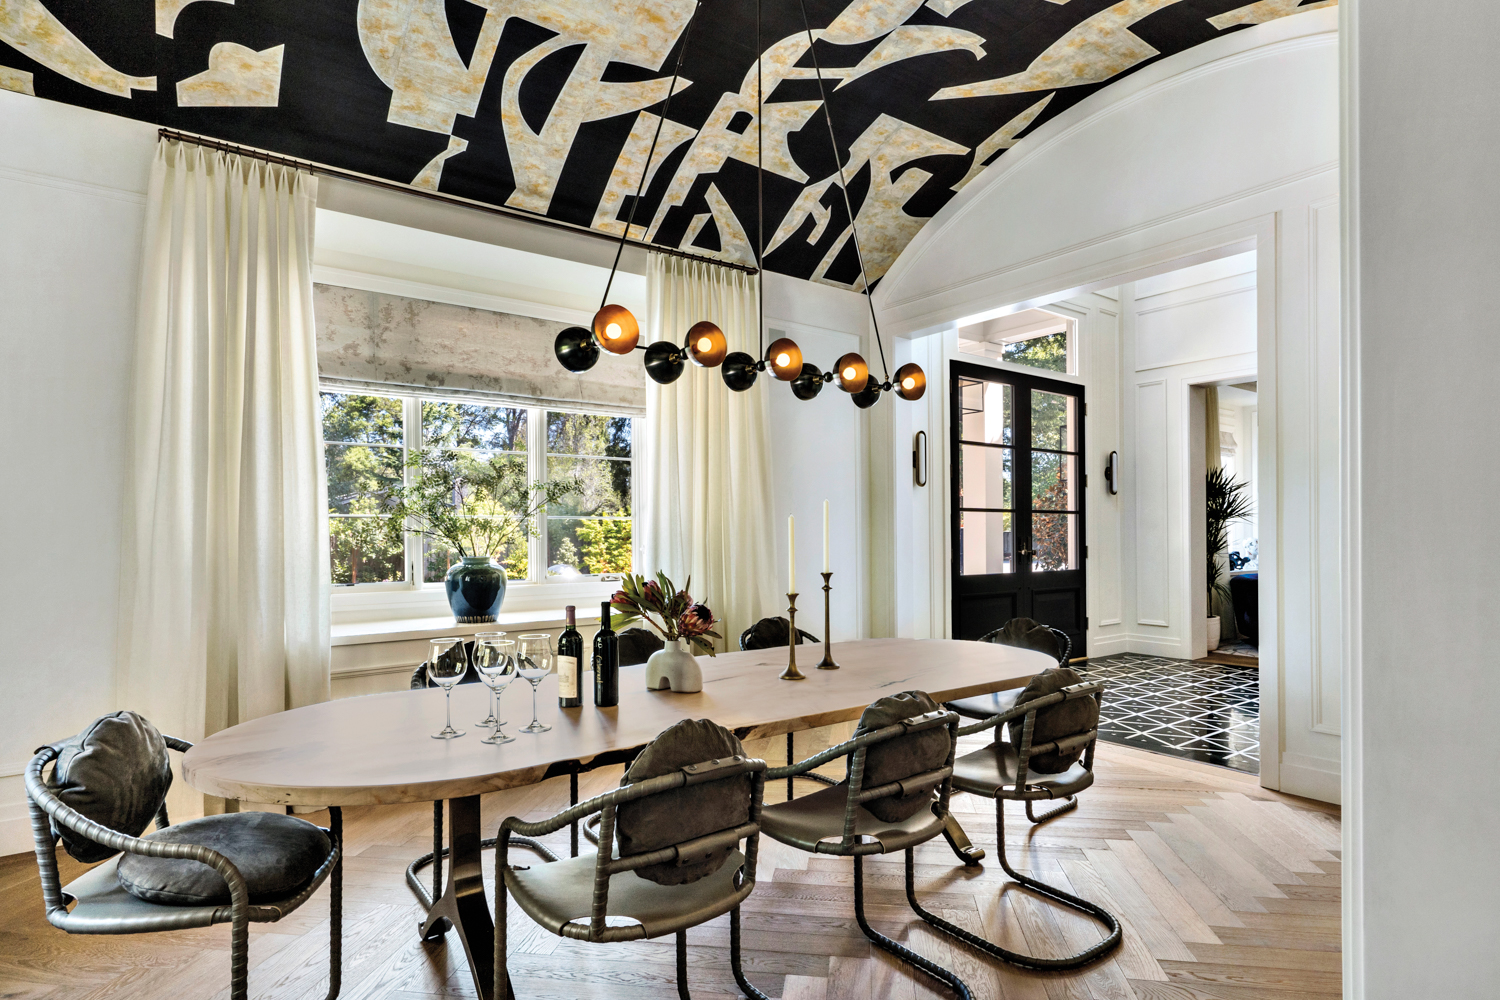 A geometric, black-and-white wallpaper covered the barrel ceiling in the dining room.